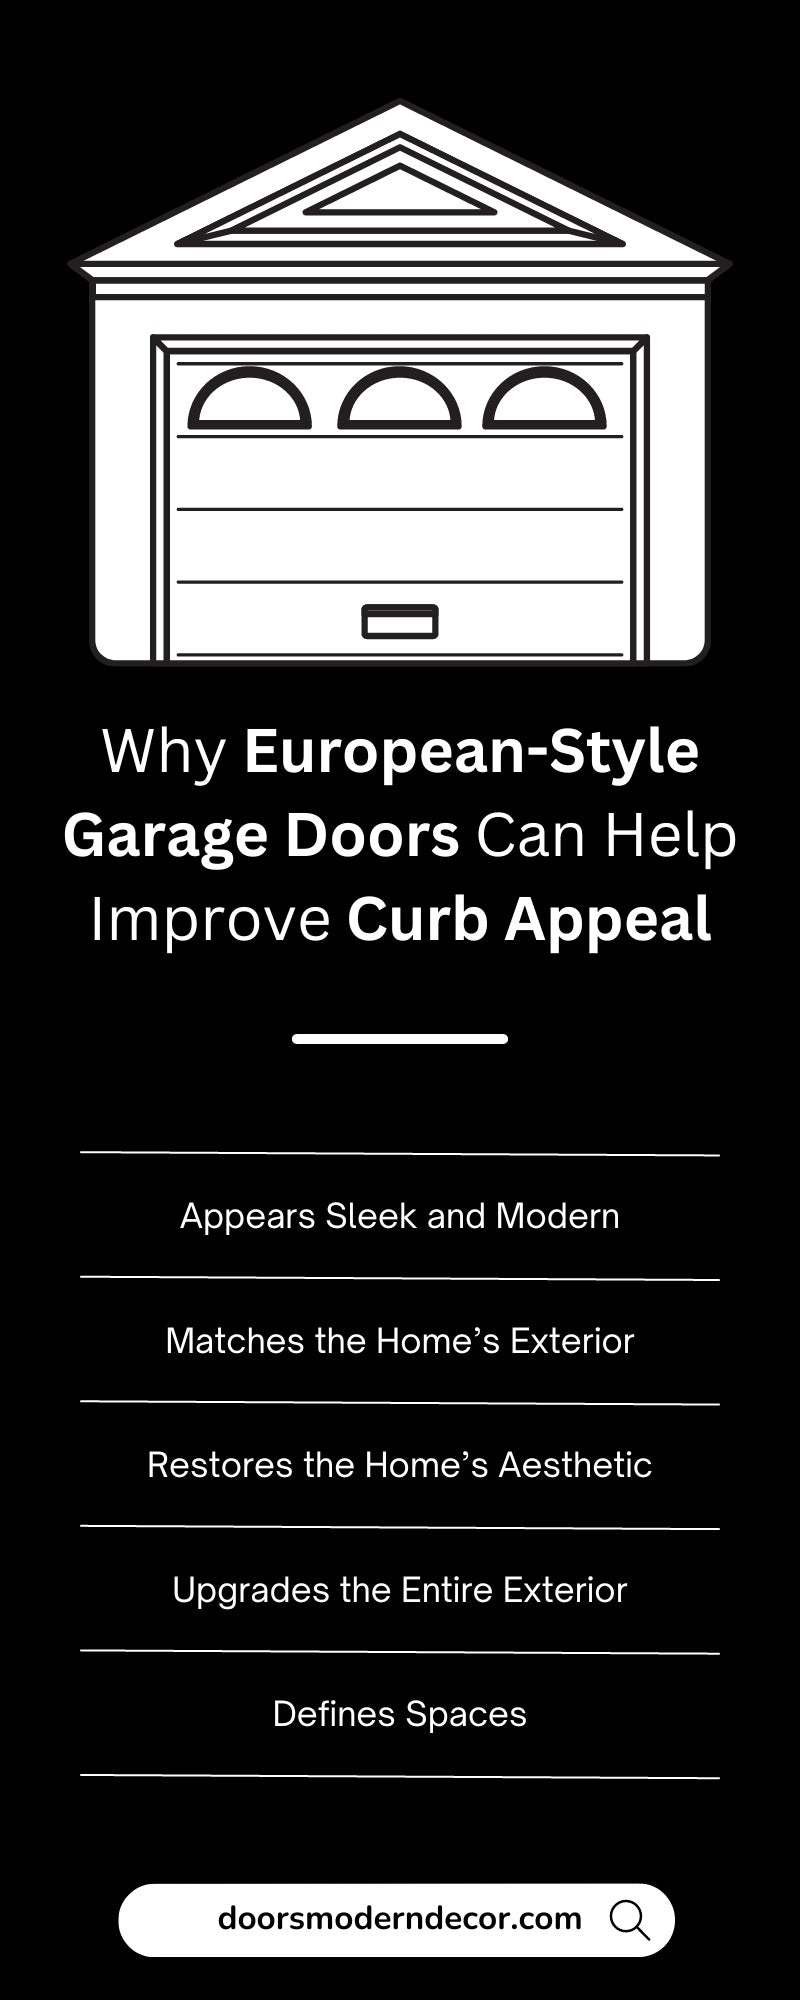 Why European-Style Garage Doors Can Help Improve Curb Appeal